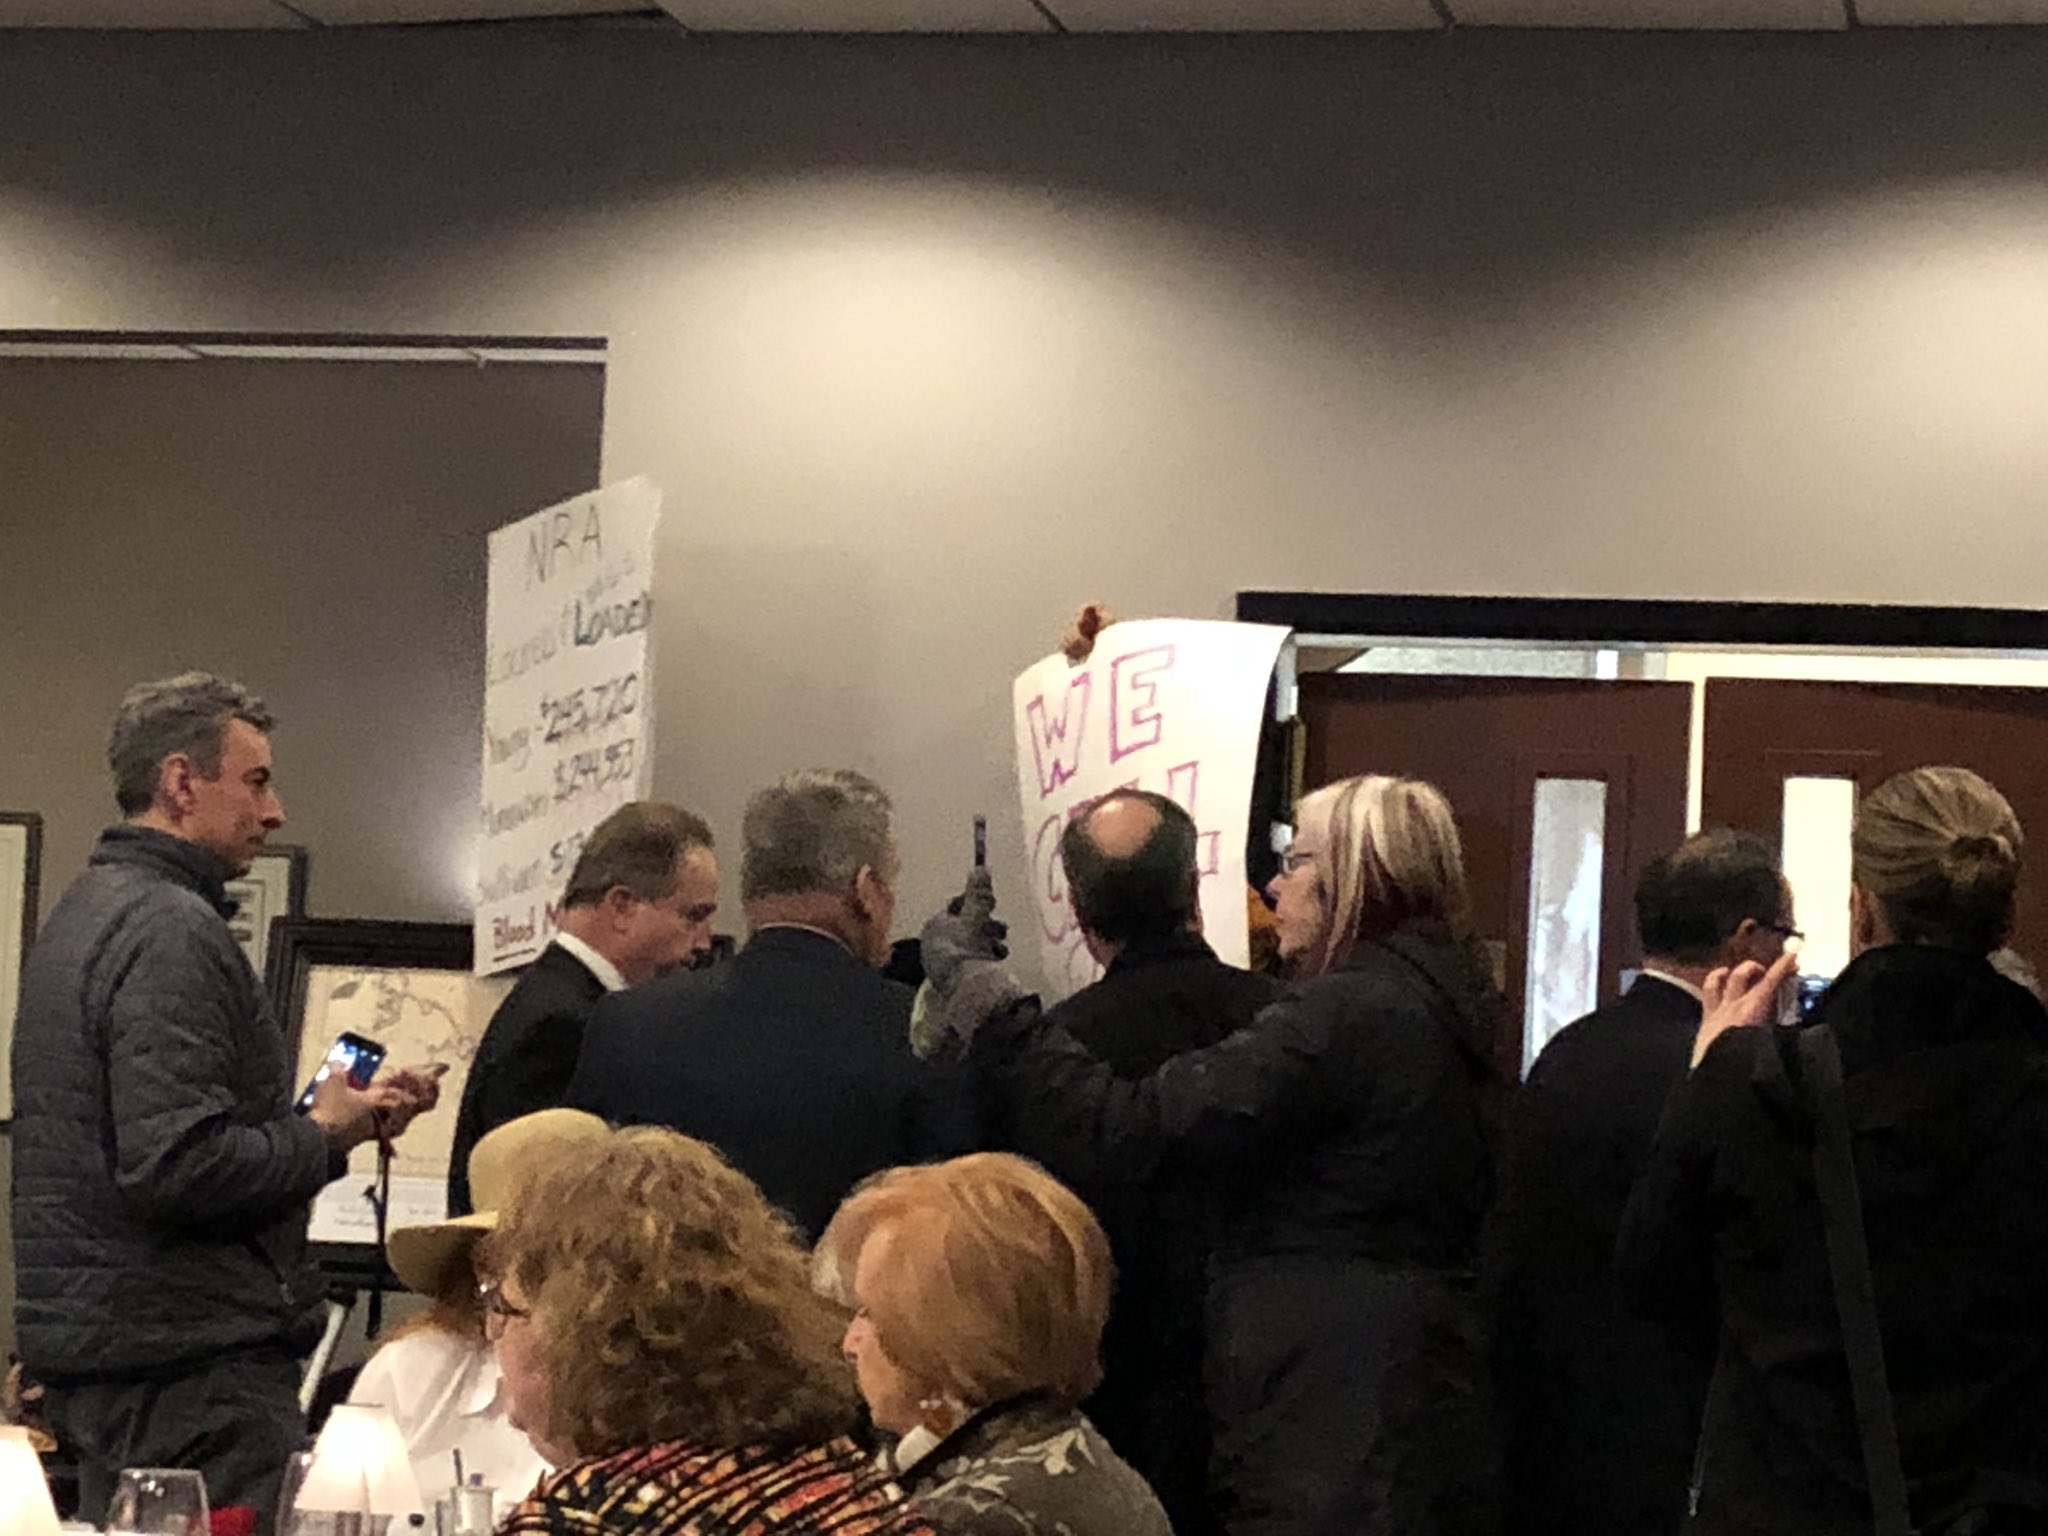 Protesters at an event featuring Sen. Lisa Murkowski and Rep. Don Young are quickly ushered out of the room on Monday, Feb. 19, 2018. (Photo by Elizabeth Harball/Alaska's Energy Desk)